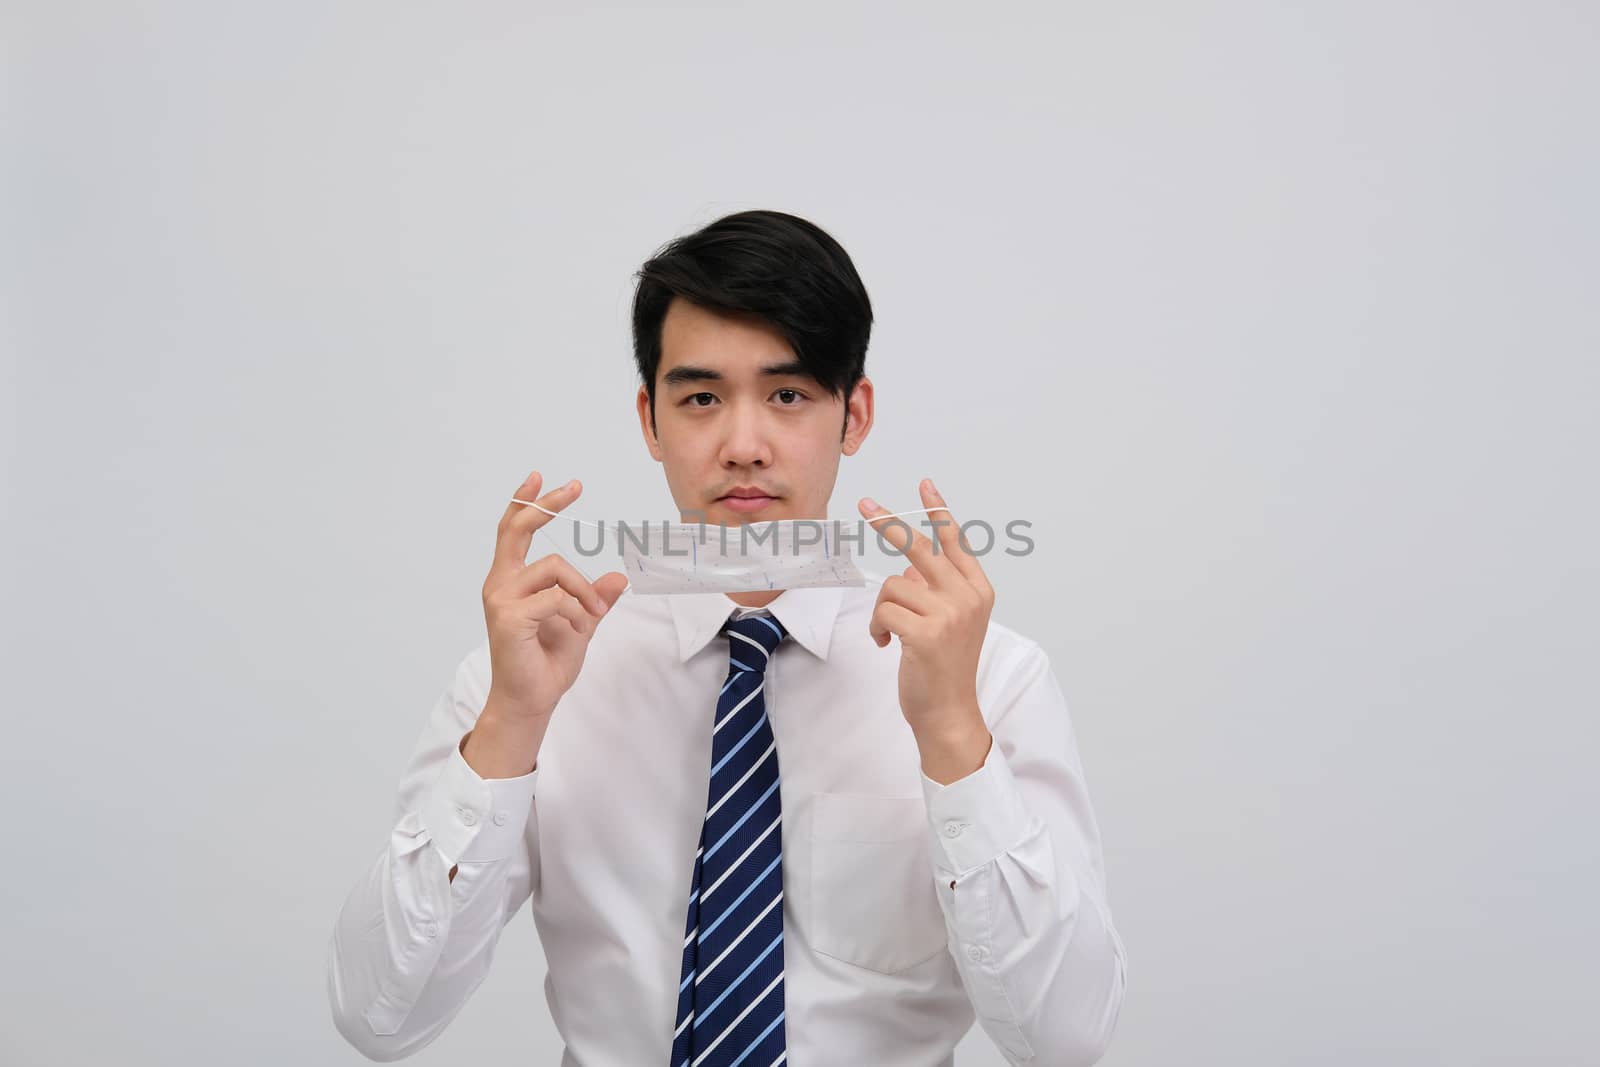 businessman man wearing protective mask against cold flu covid 19 virus bacteria infection pollution